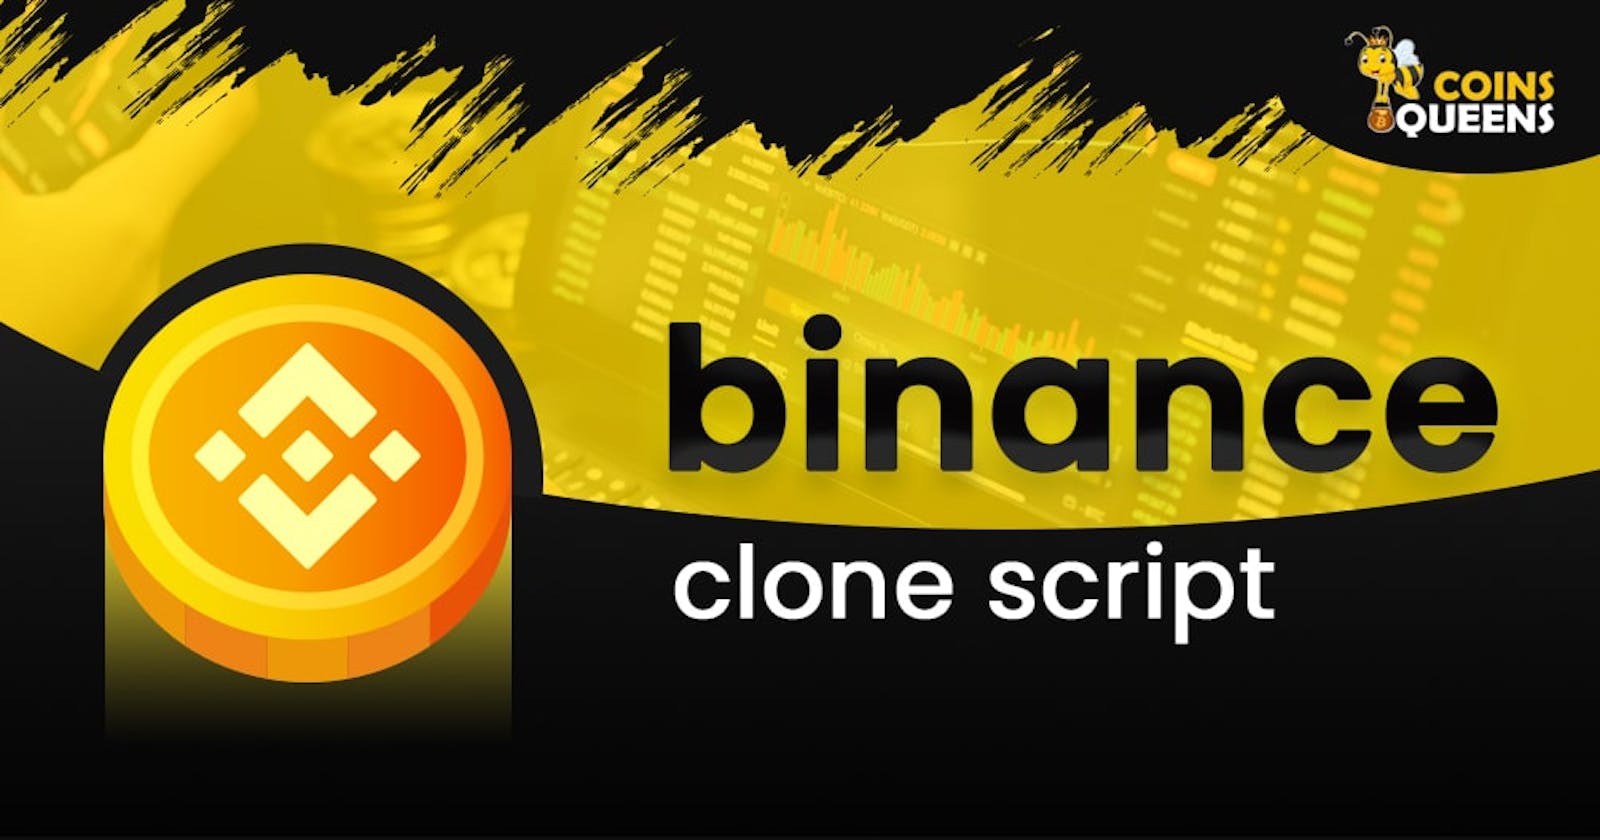 Business benefits of the binance clone script in the current crypto market